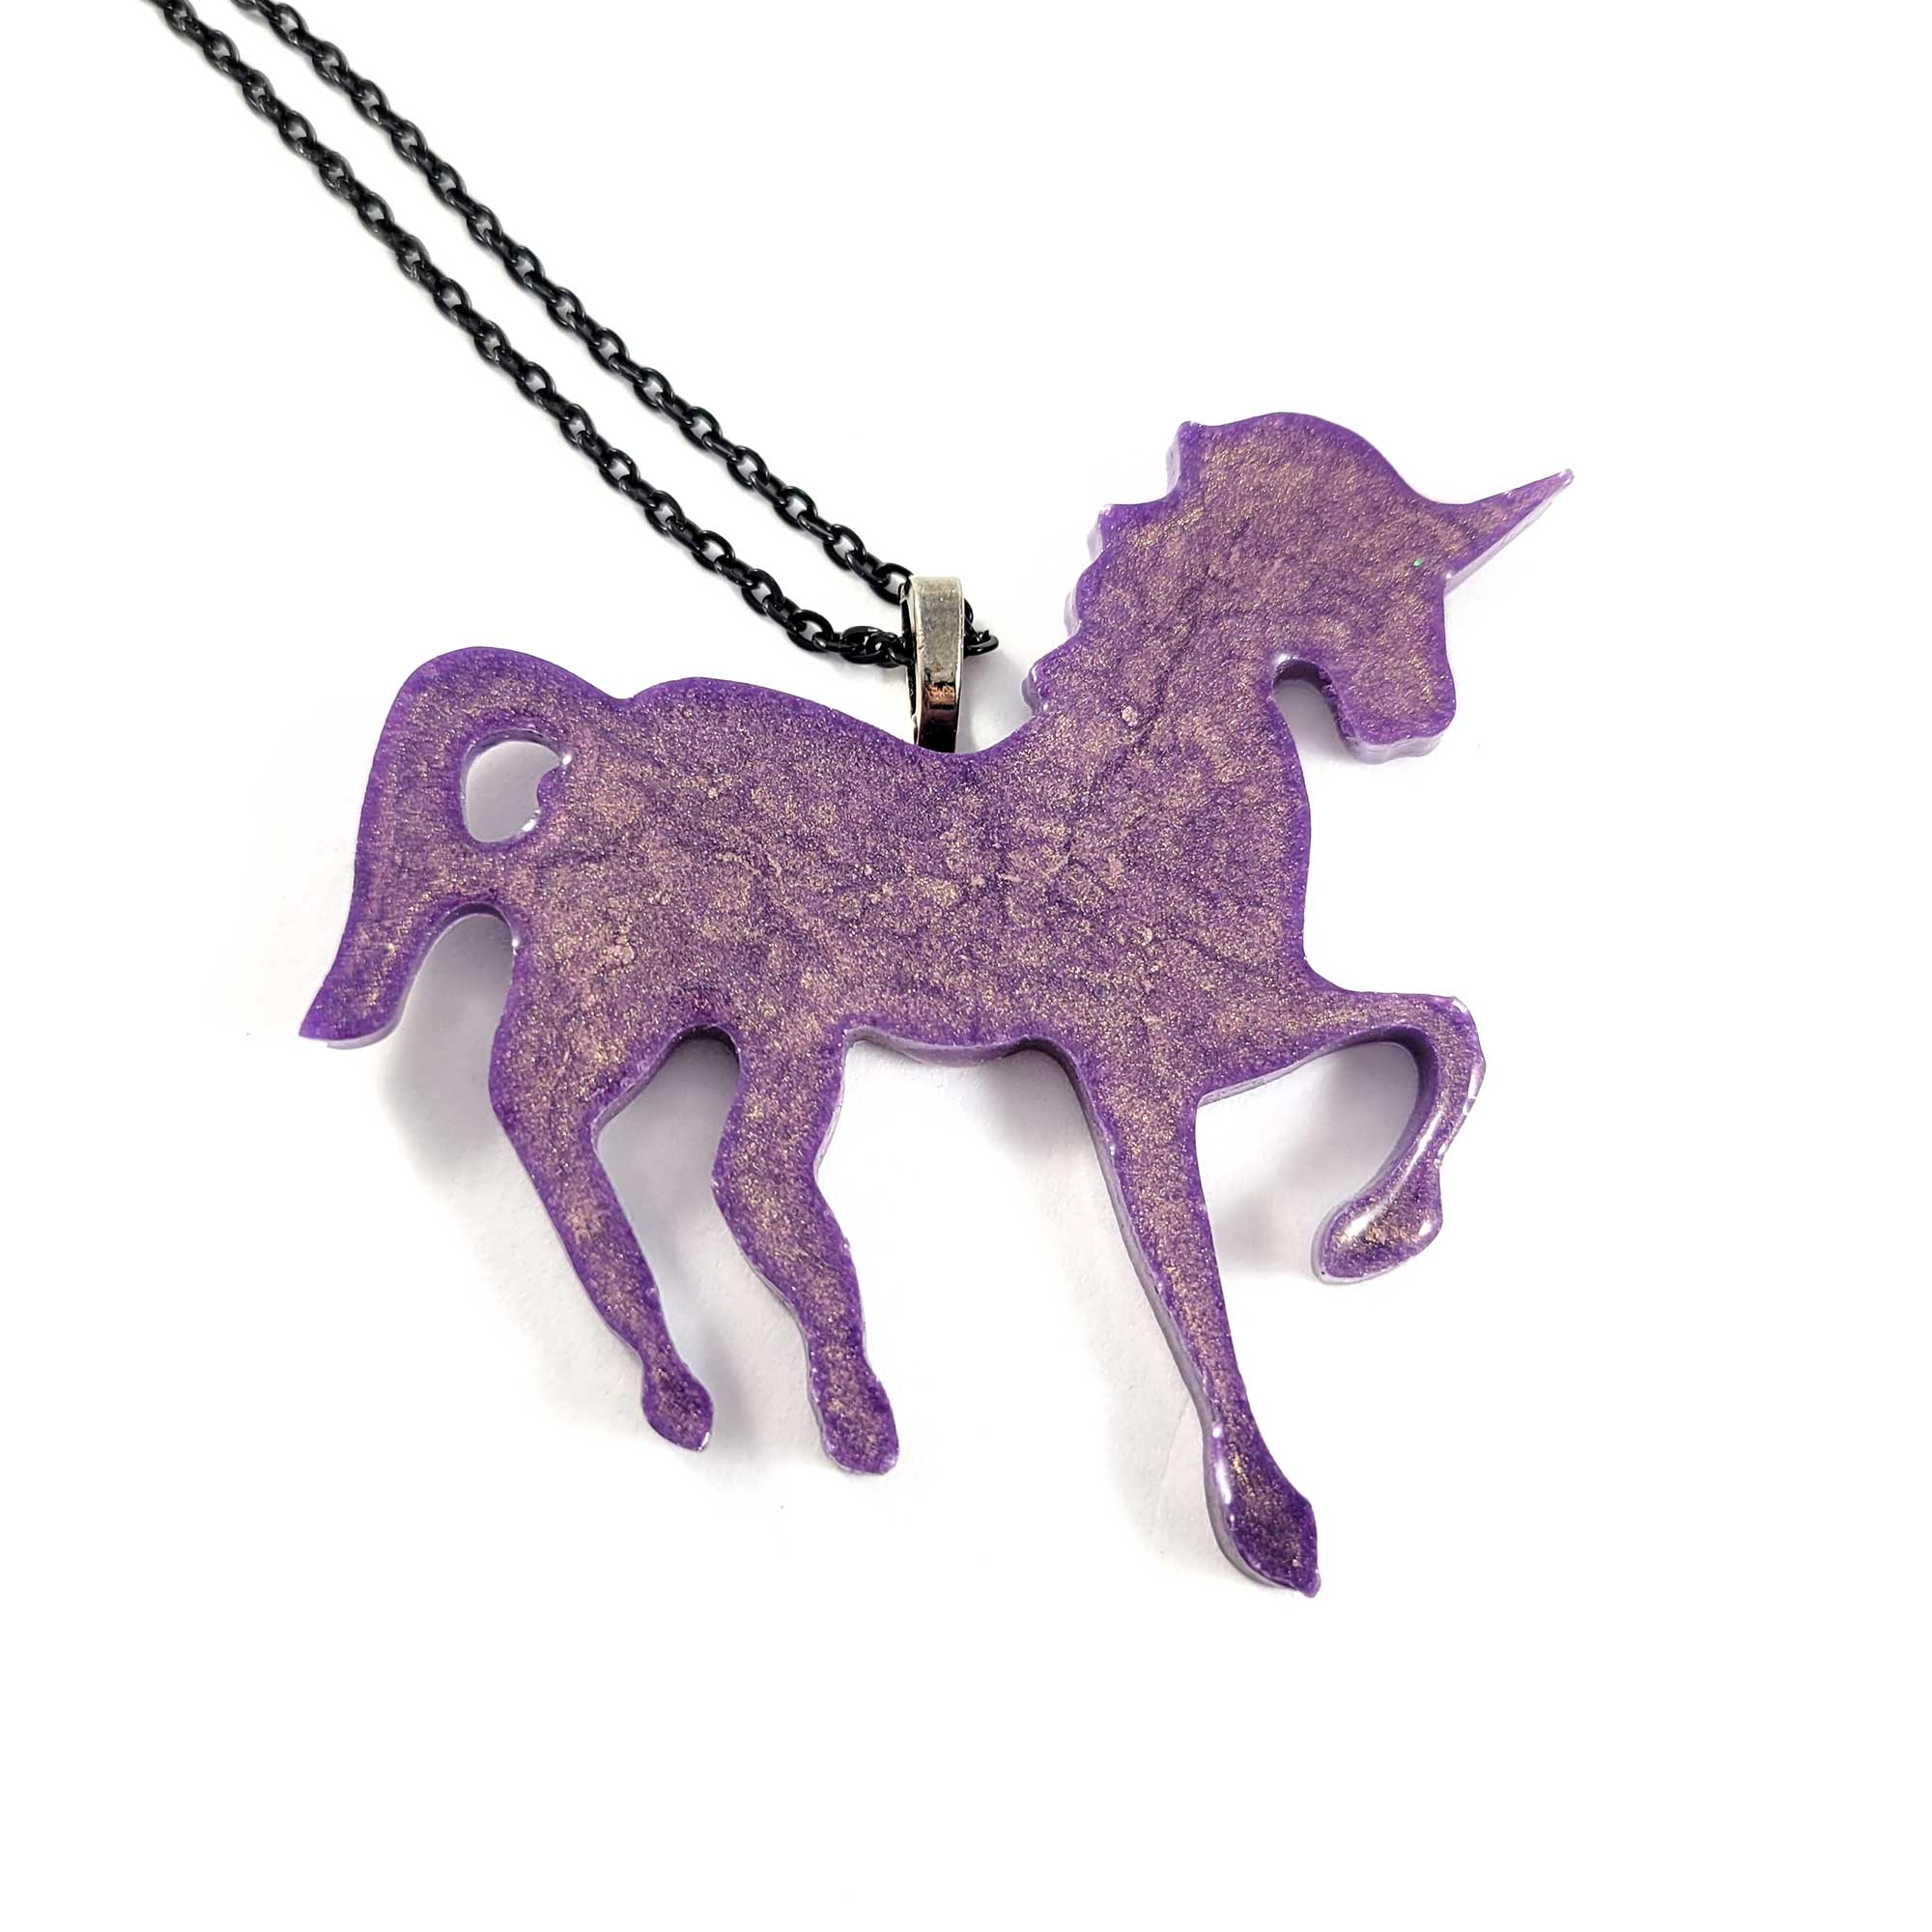 Prancing Unicorn Necklace by Wilde Designs